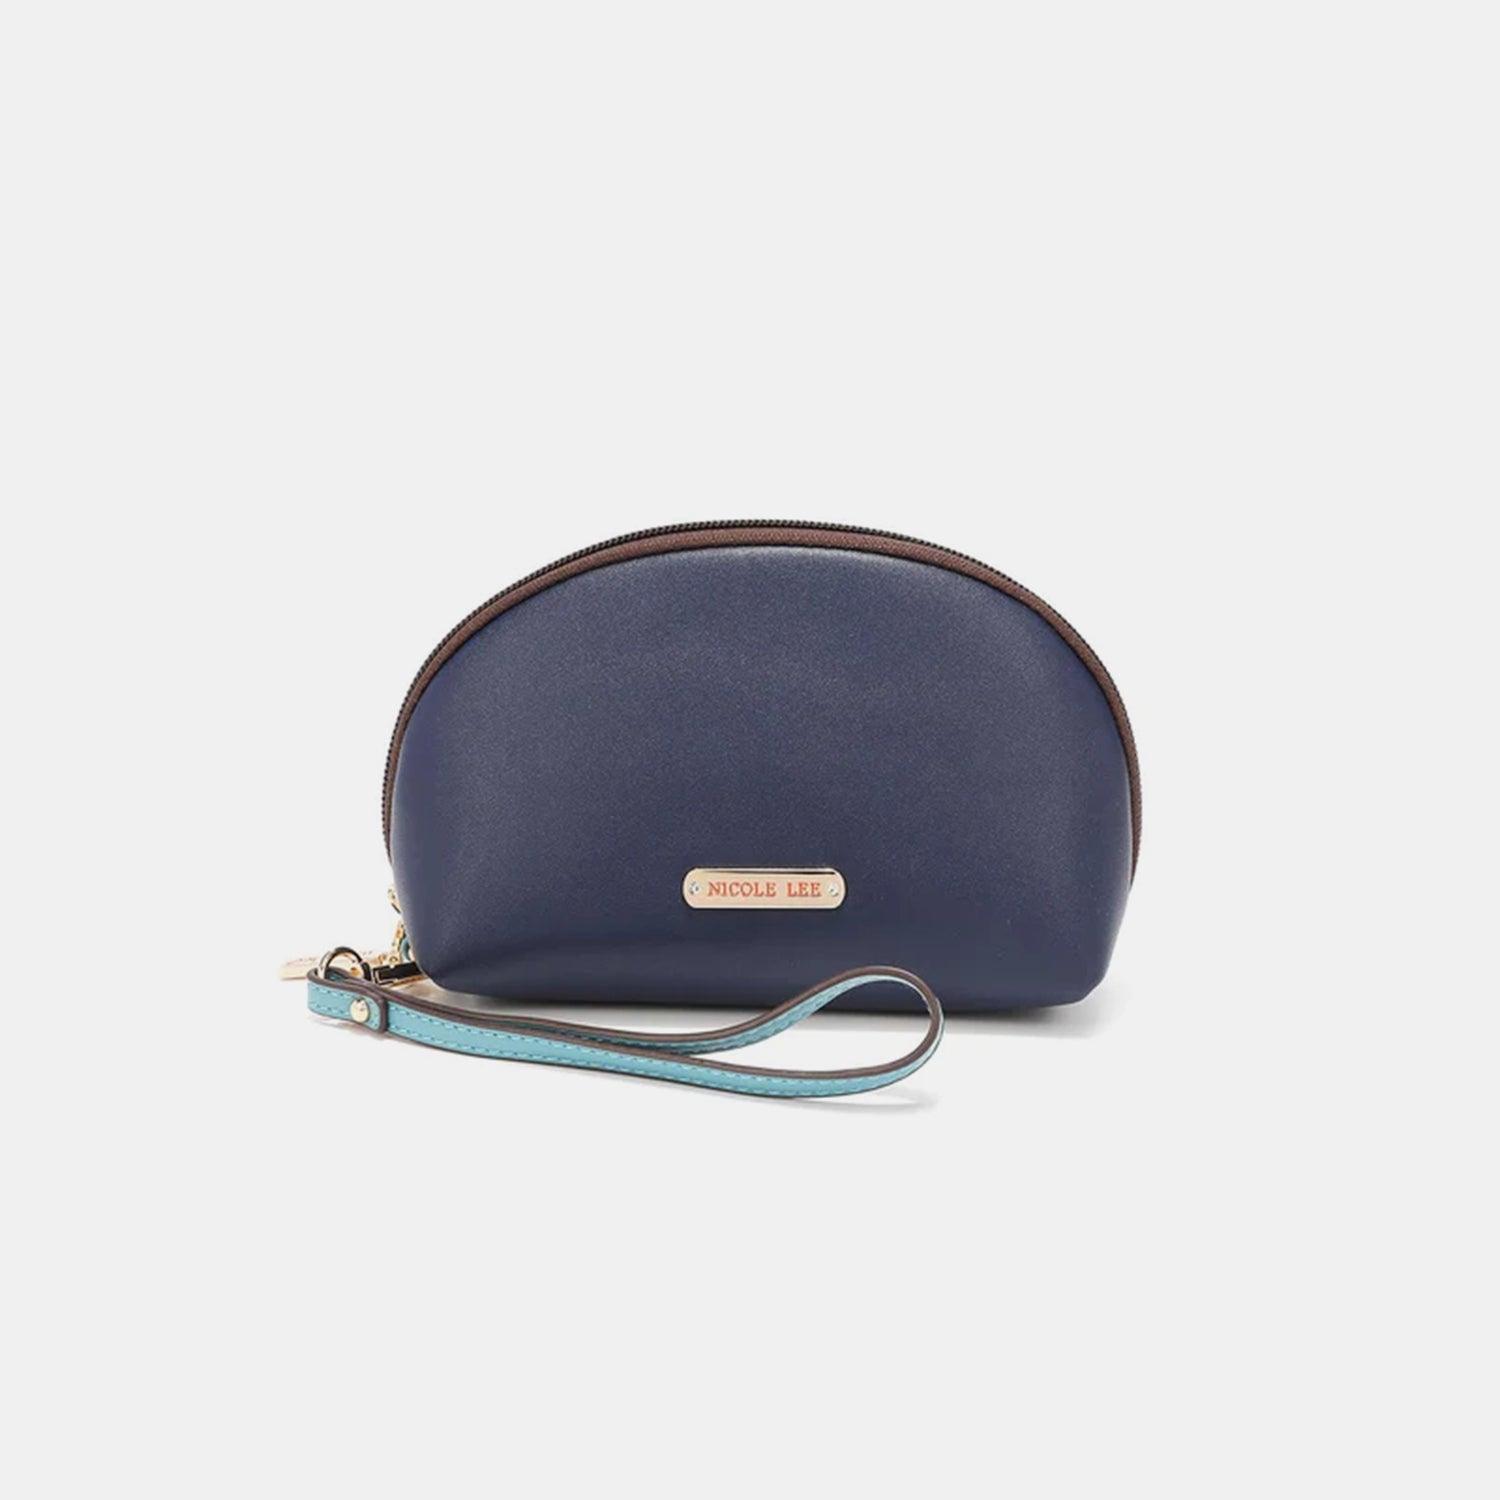 a small blue purse with a blue strap